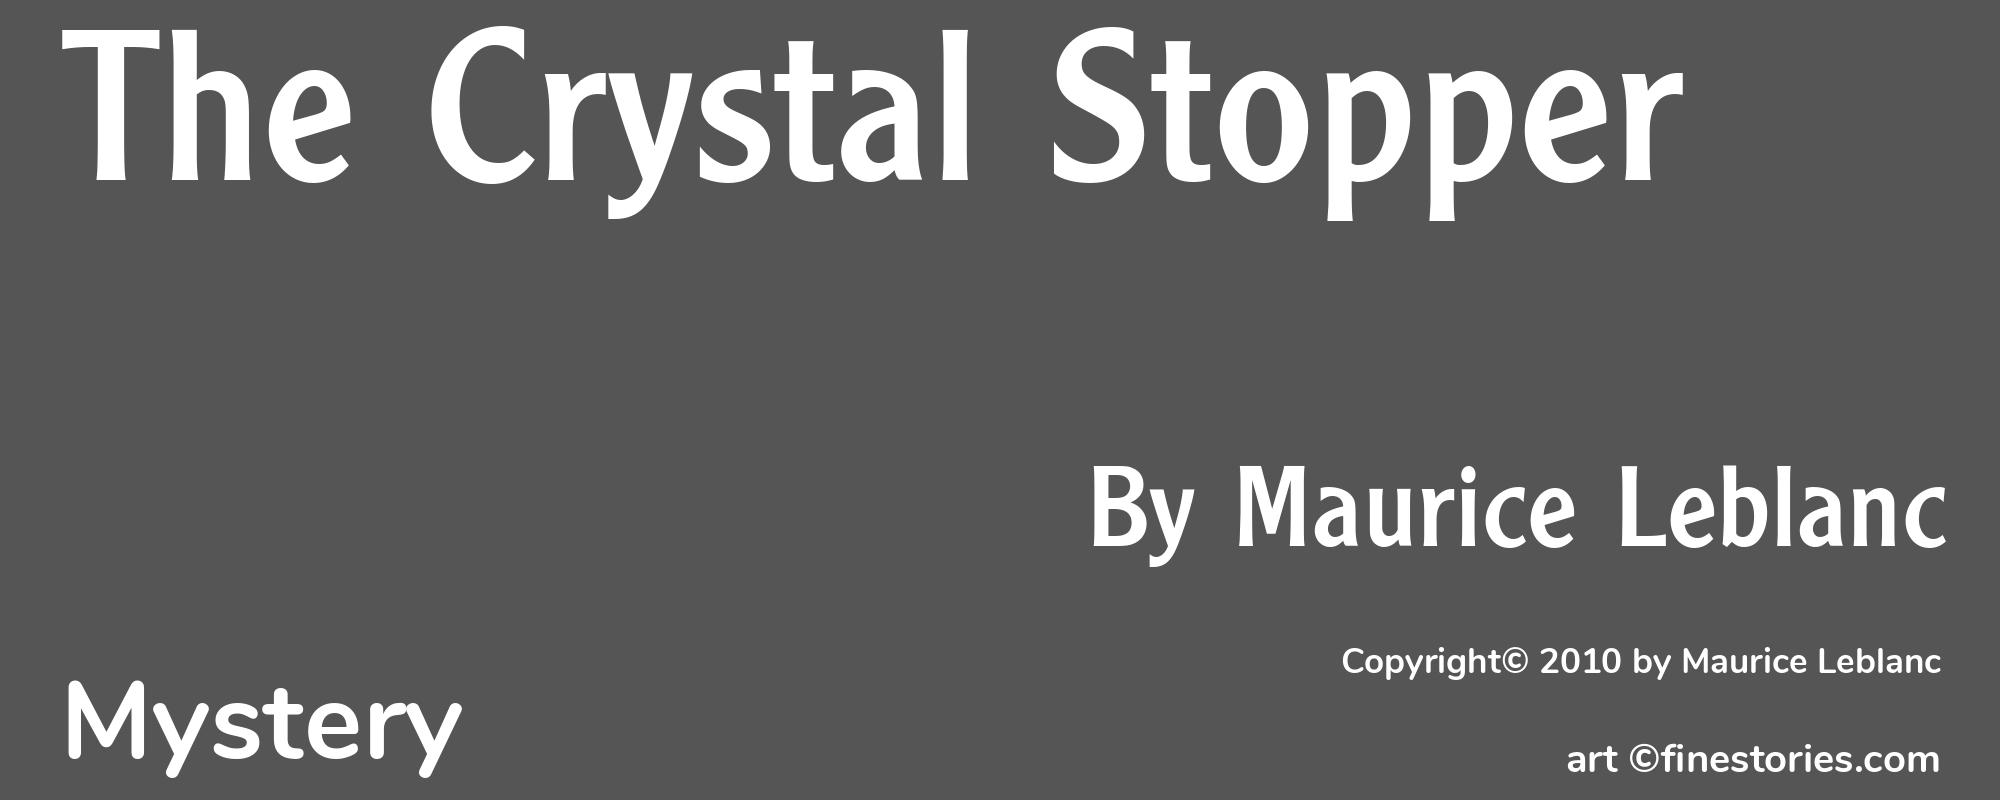 The Crystal Stopper - Cover